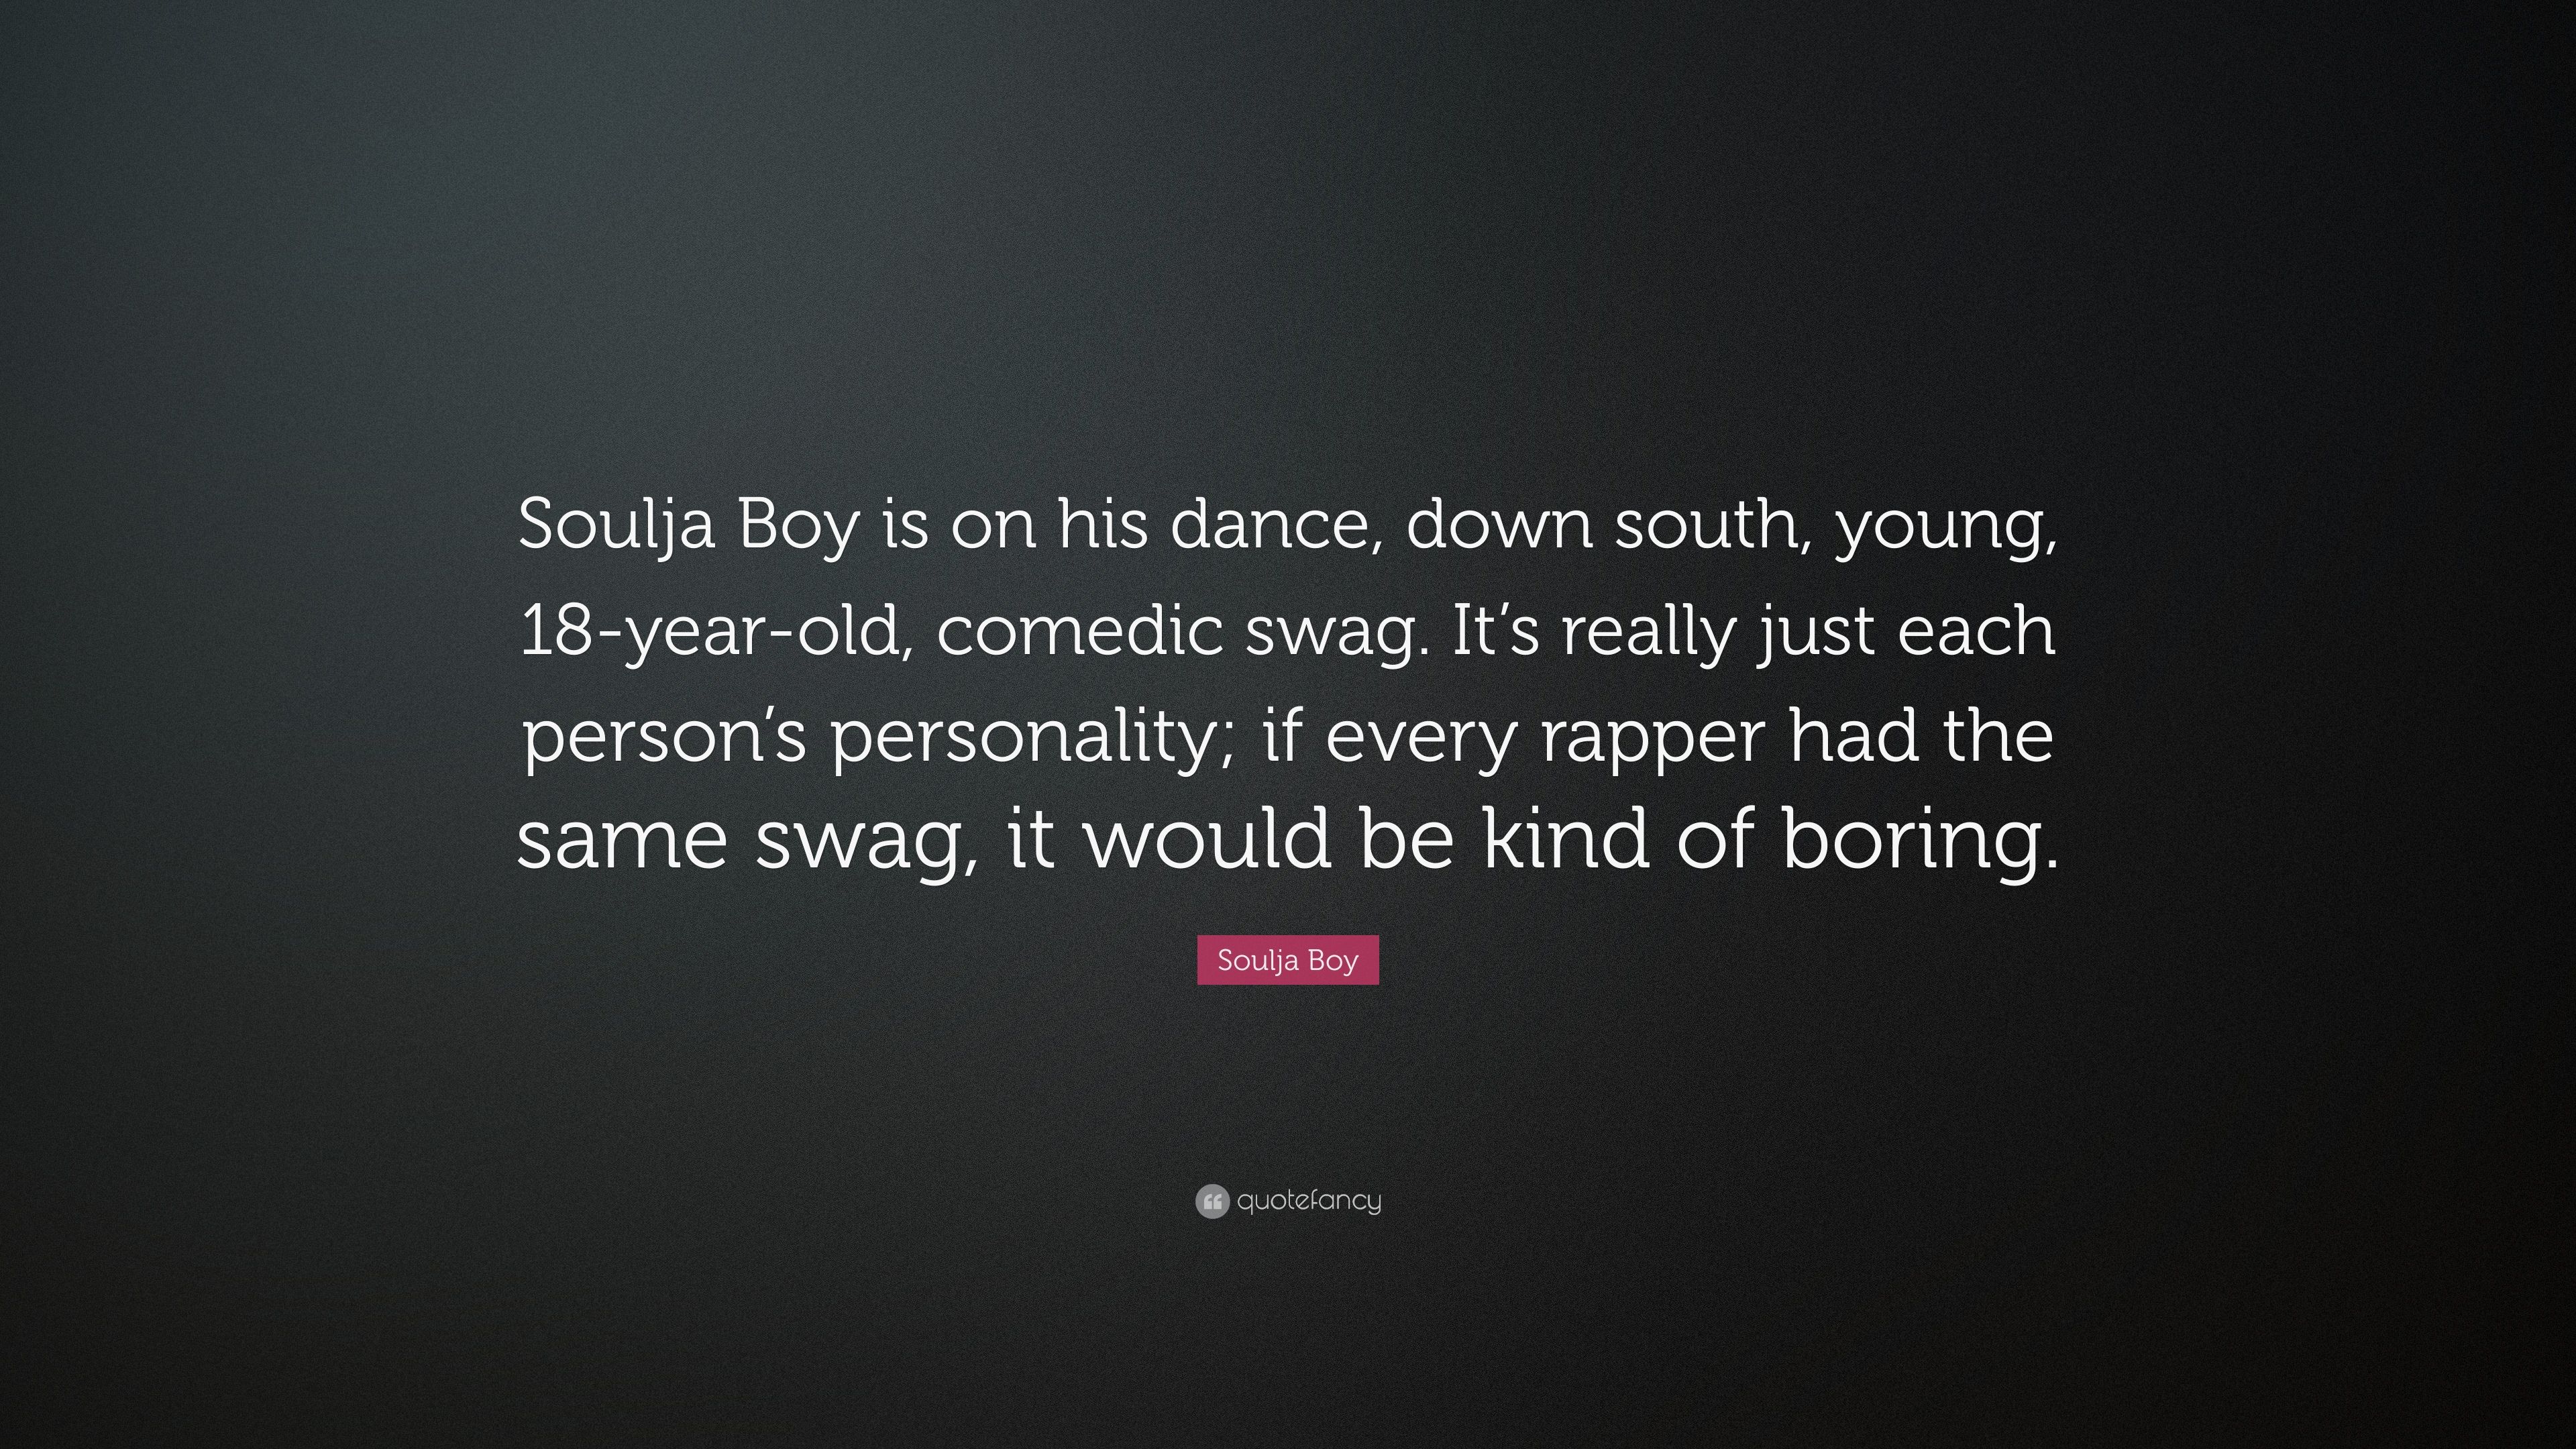 Soulja Boy Quote: “Soulja Boy is on his dance, down south, young, 18